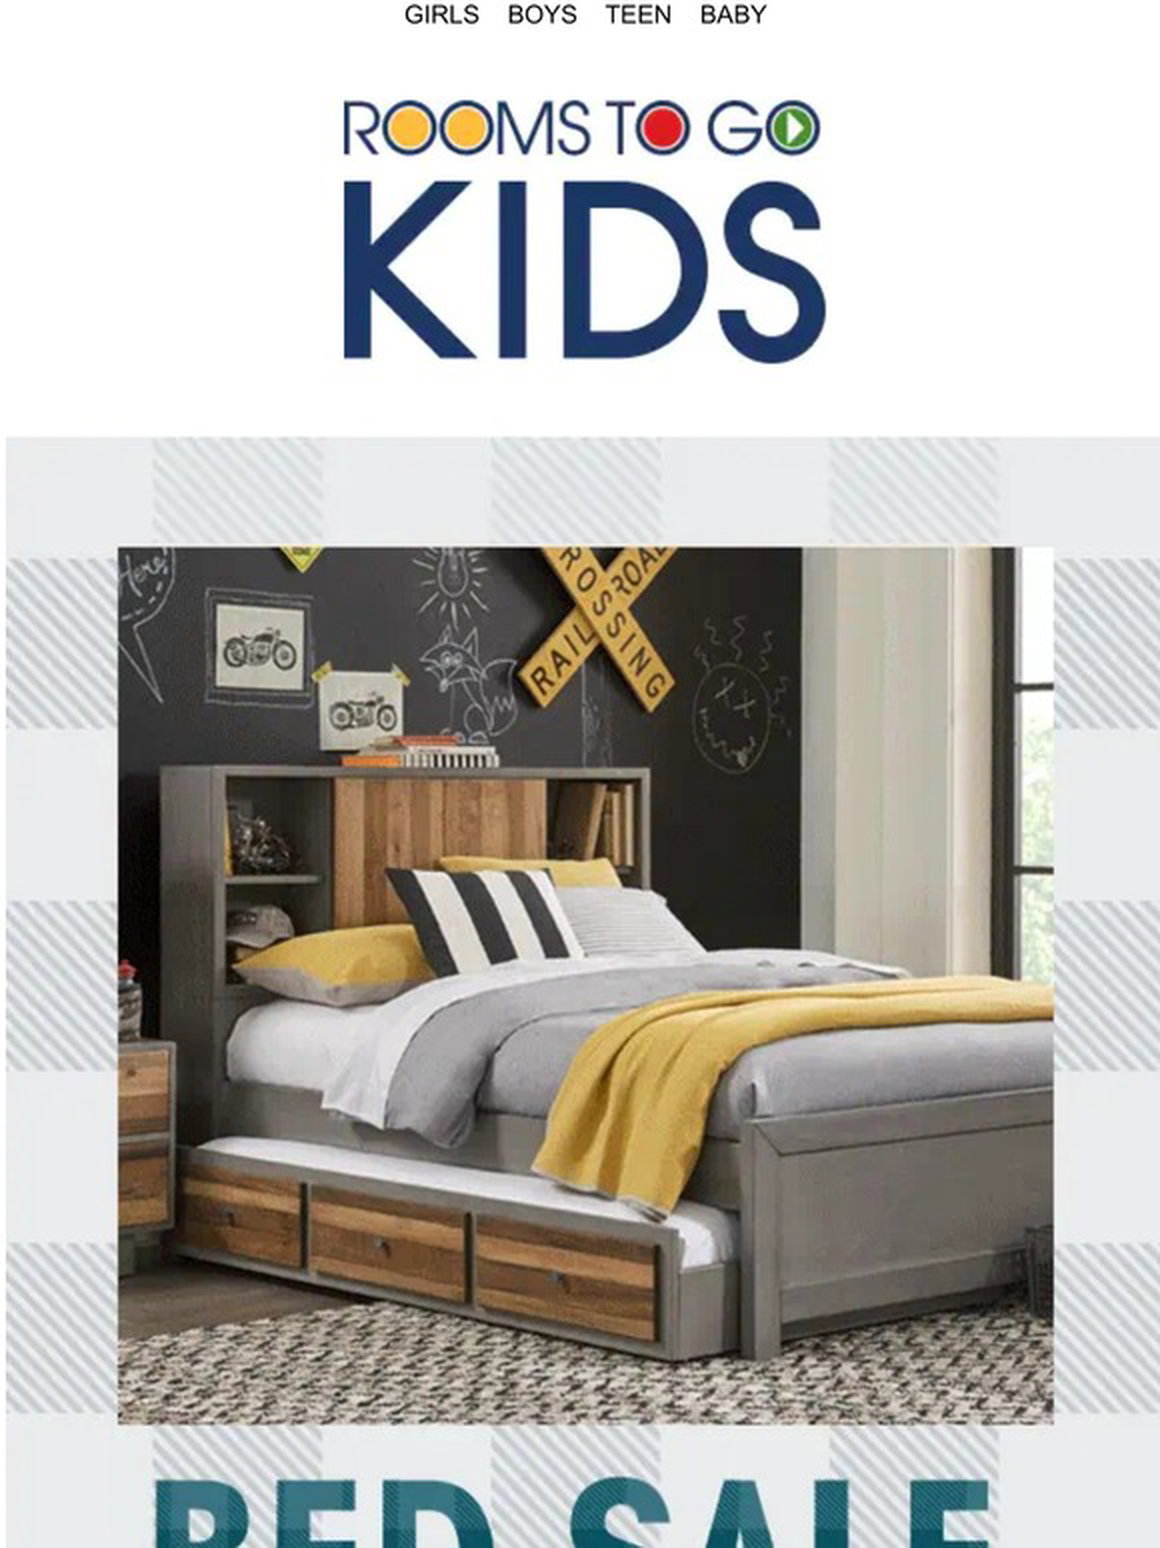 Rooms To Go Coupons Inside Super Savings For Kids Teens